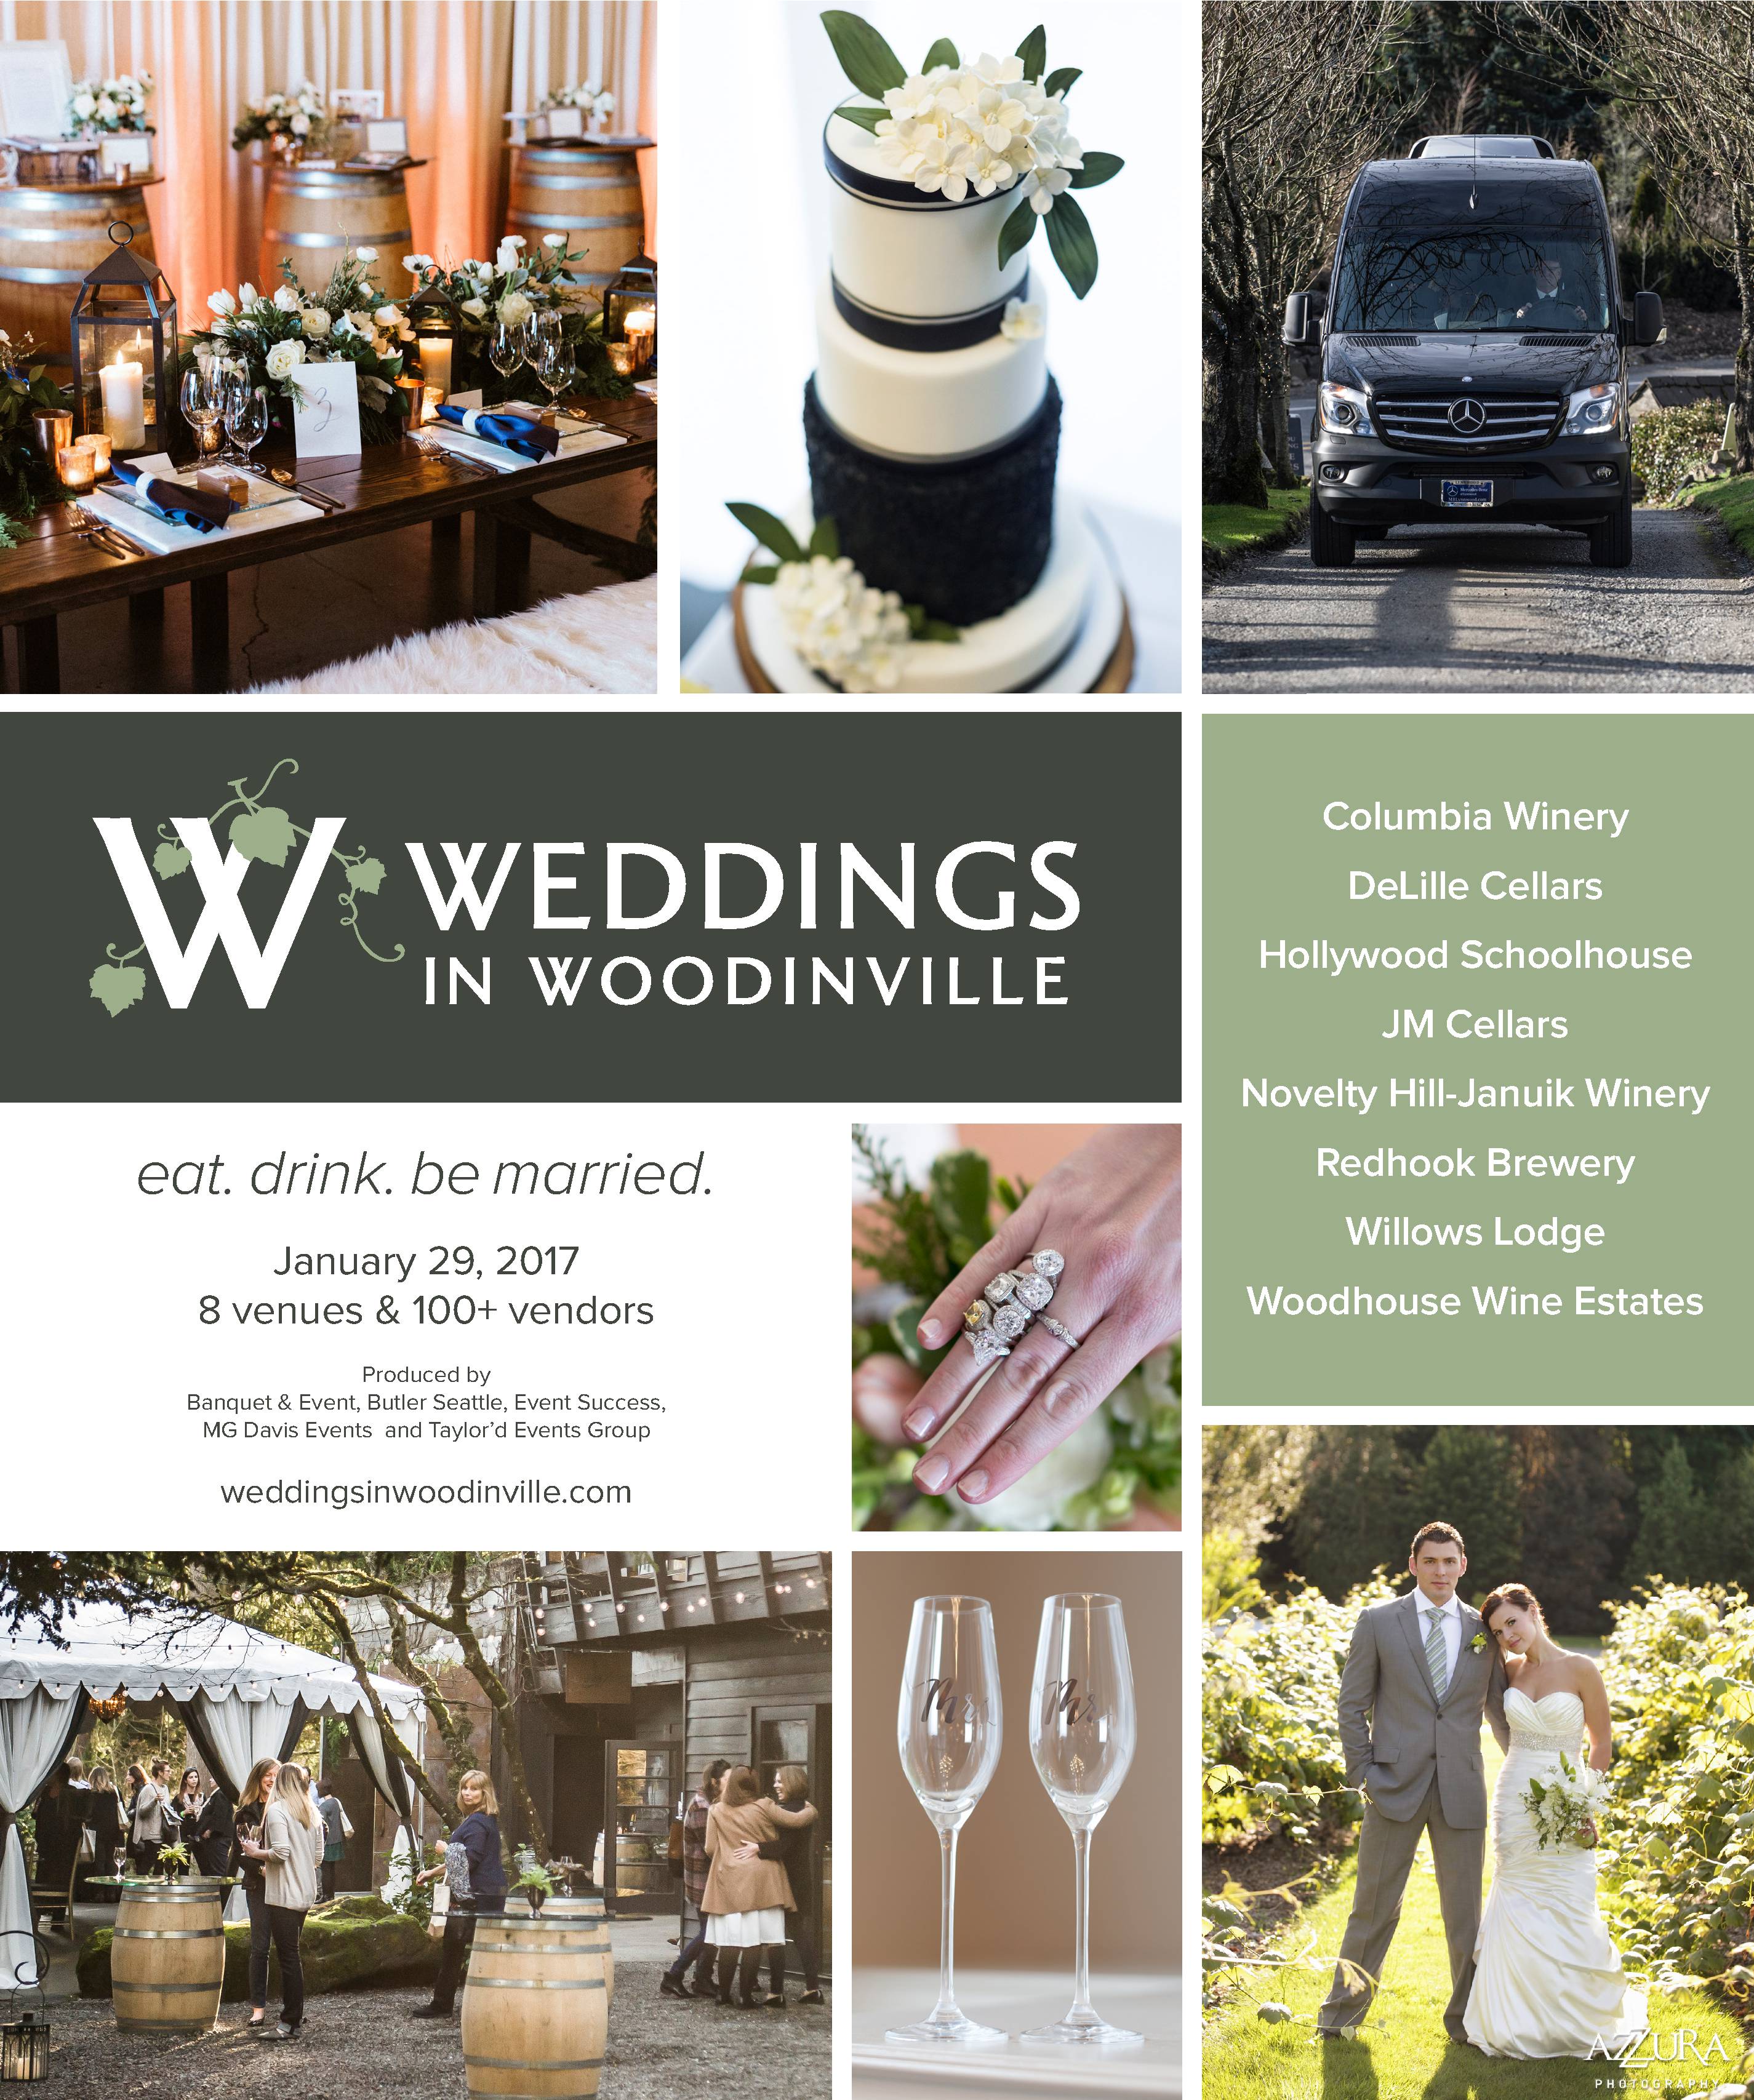 Weddings in Woodinville 2017